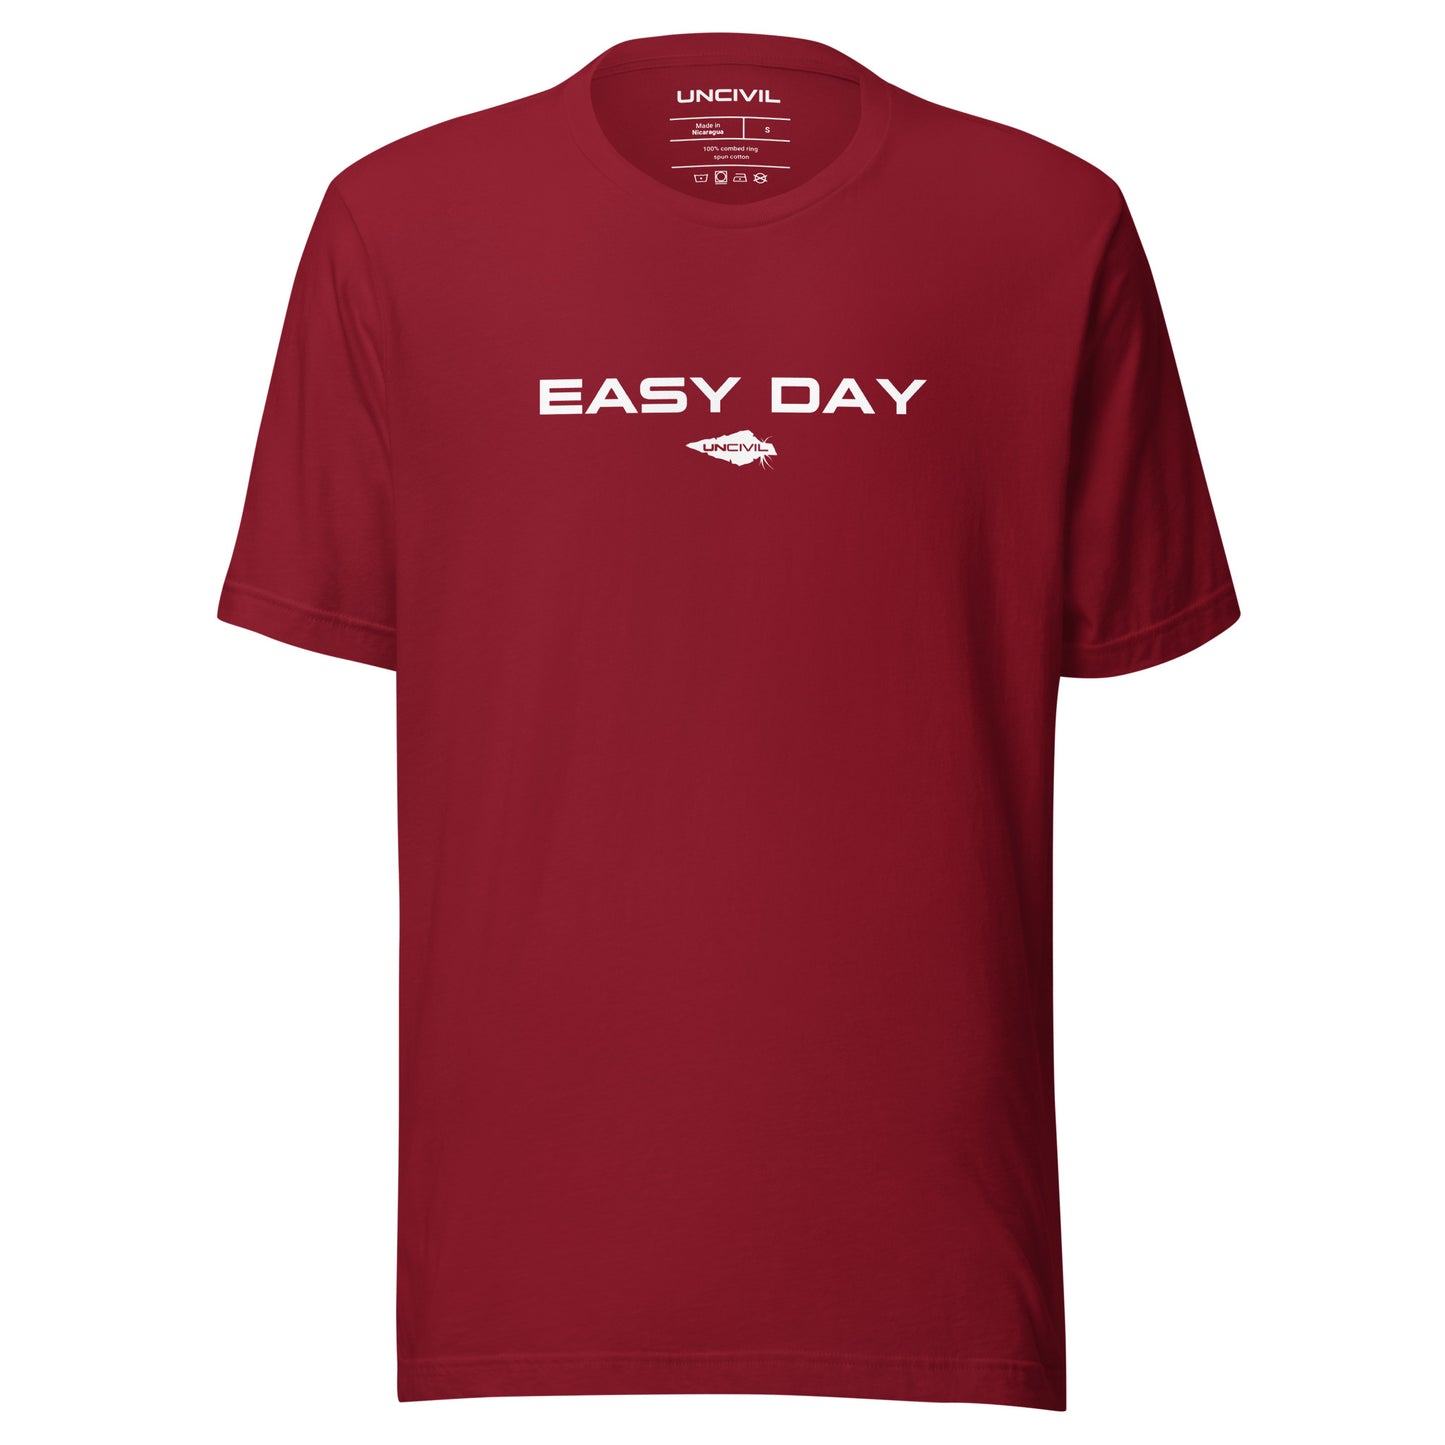 Easy Day UNCIVIL Tee, inspired by the Navy Seals phrase "Easy Day". Red men's shirt.